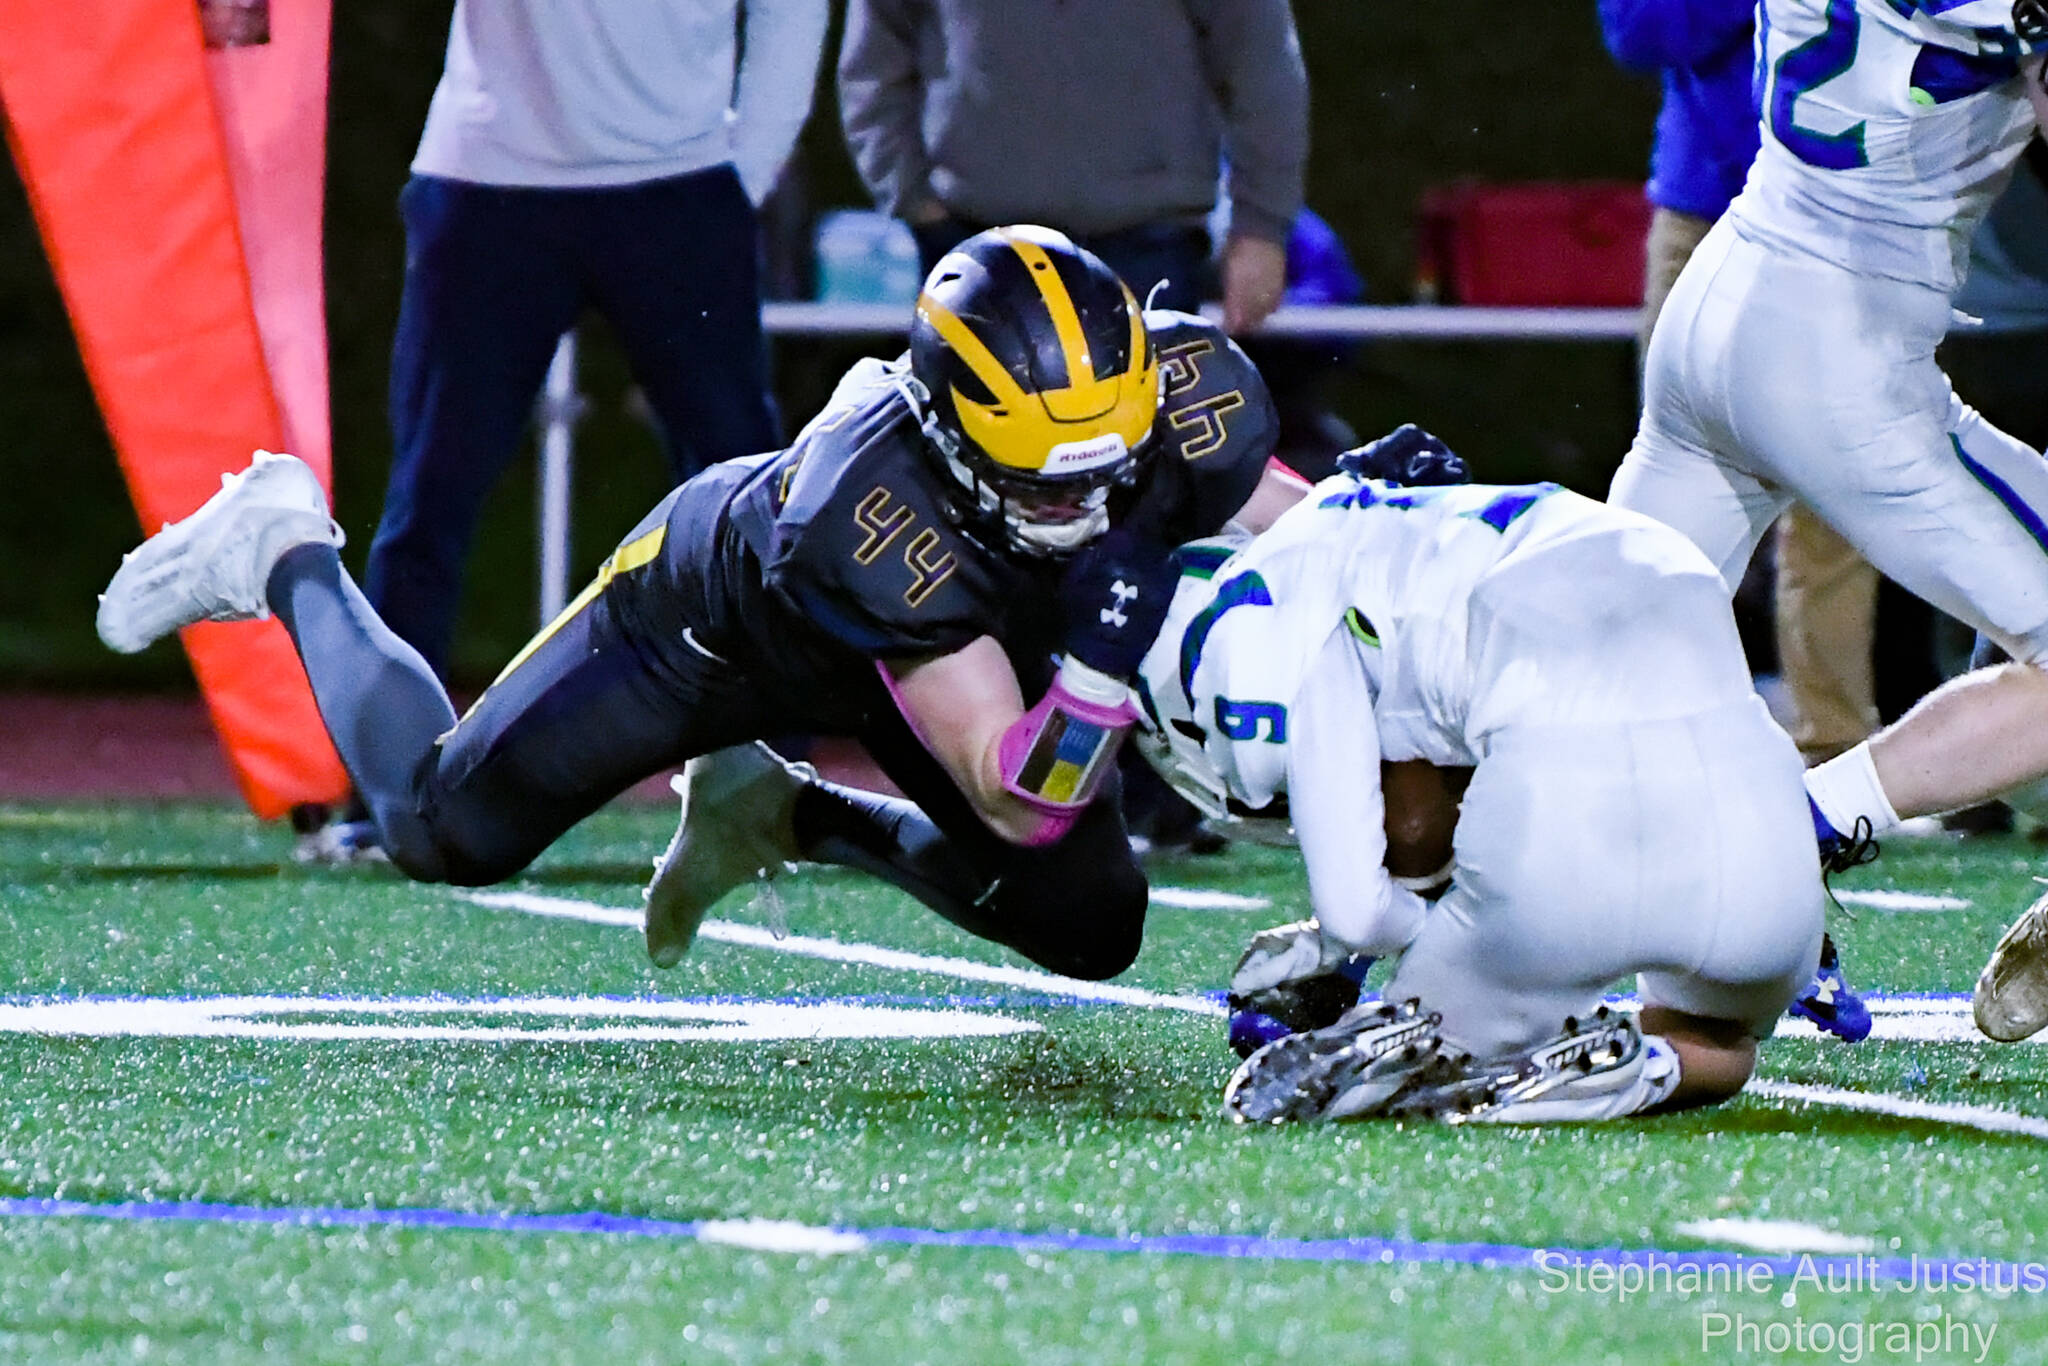 Bellevue’s George Kruger tackles Liberty’s Nathan Moffitt. Bellevue is 4-0 in 3A KingCo and 7-0 overall. Photo courtesy of Stephanie Ault Justus